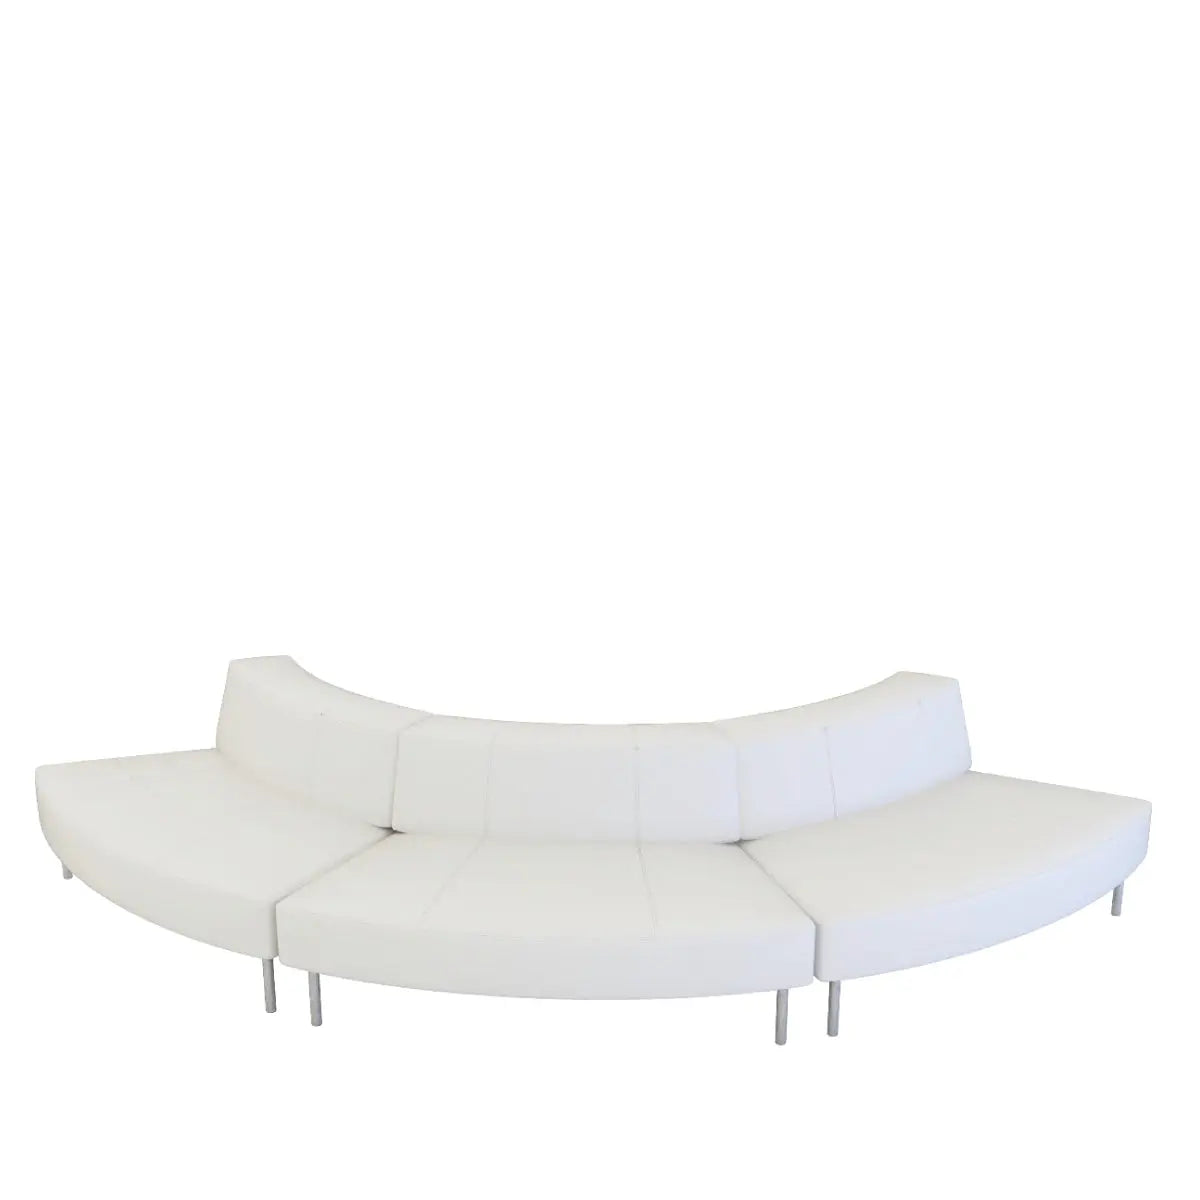 Endless 7 seater curved sofa with small low back Desert River Rentals